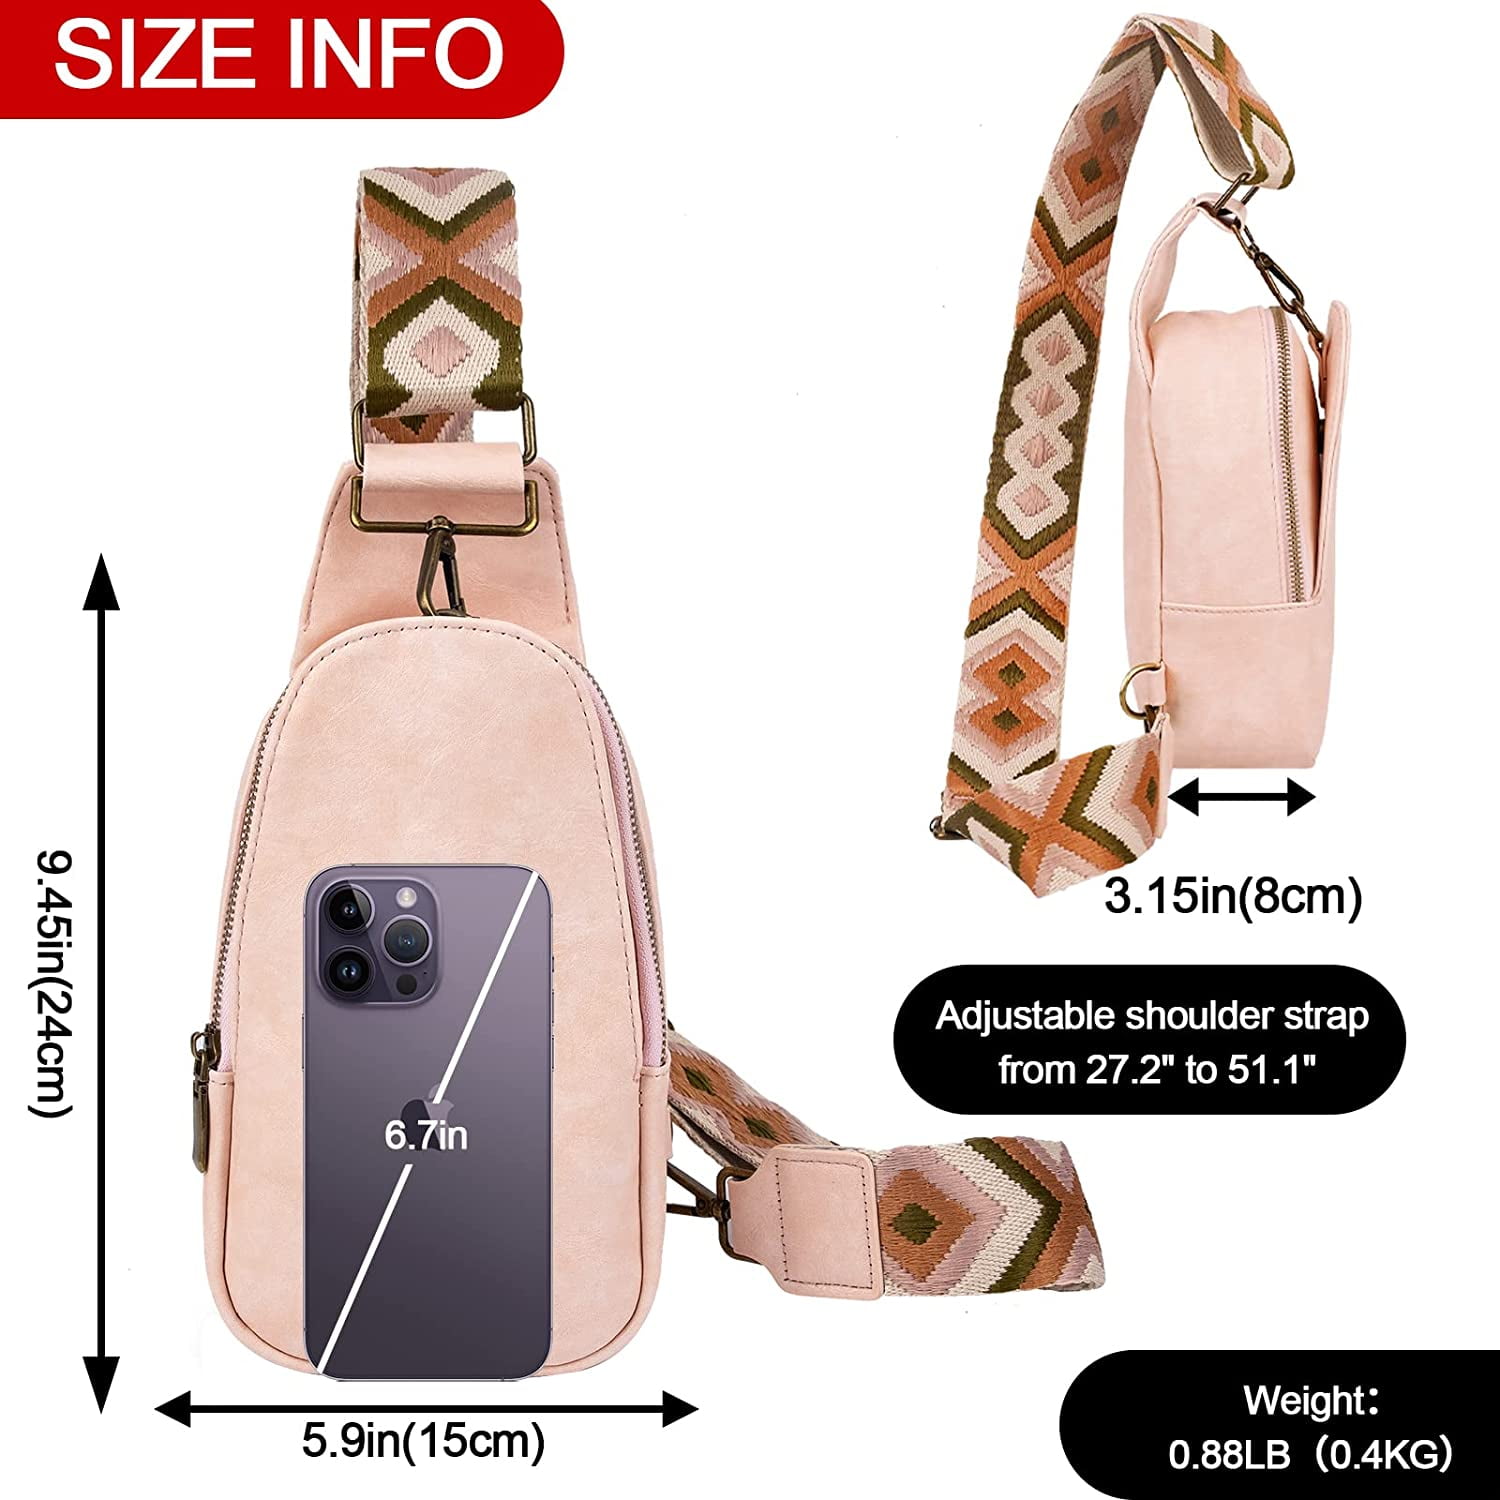 OLOEY Small Sling Backpack Leather Crossbody Bag Purse Shoulder Bags for  Student Women Girl with Headphone Jack 